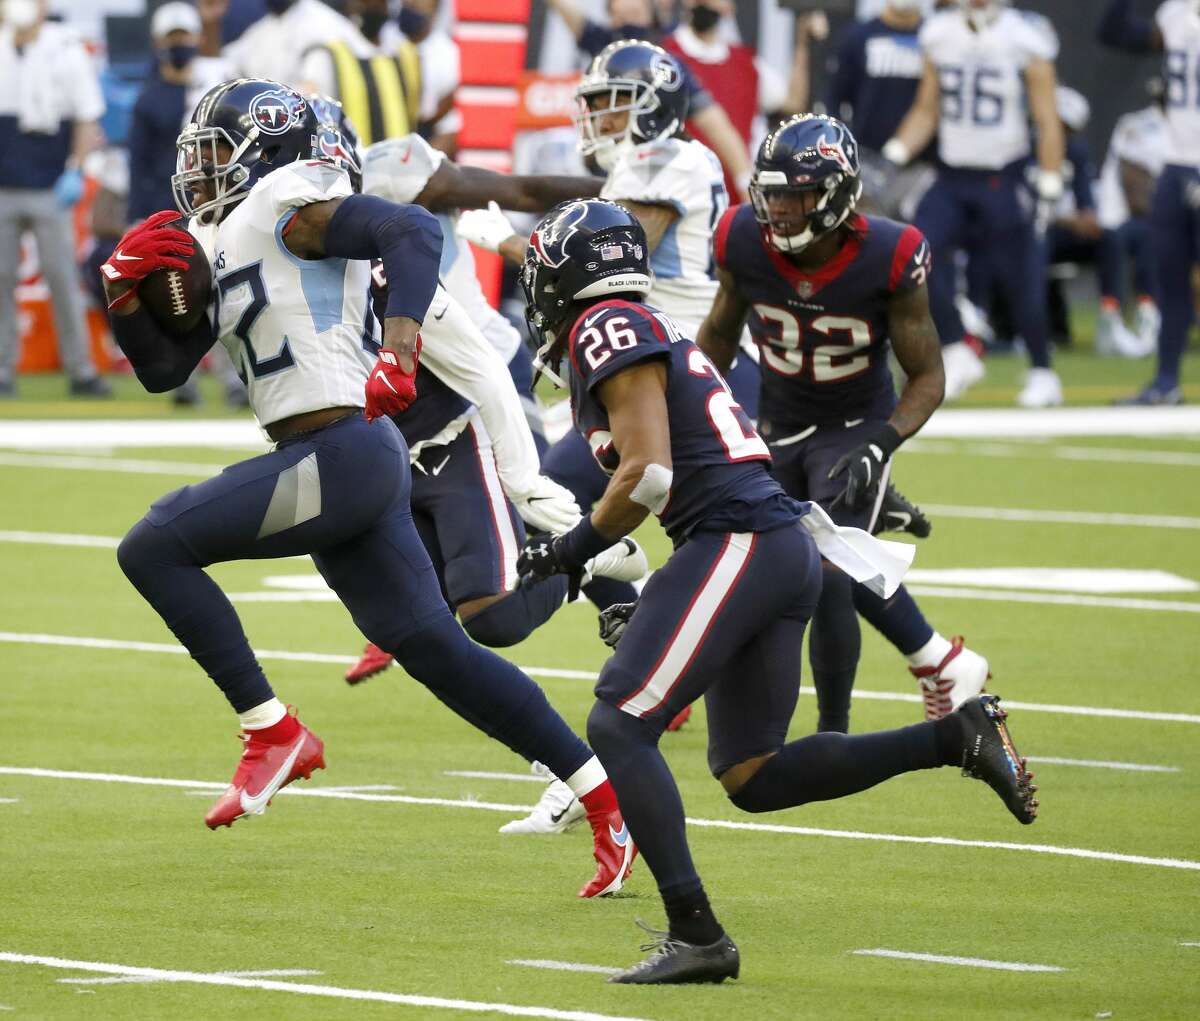 Titans running back Derrick Henry missed both games against the Texans in 2021 but has feasted against them in the past.